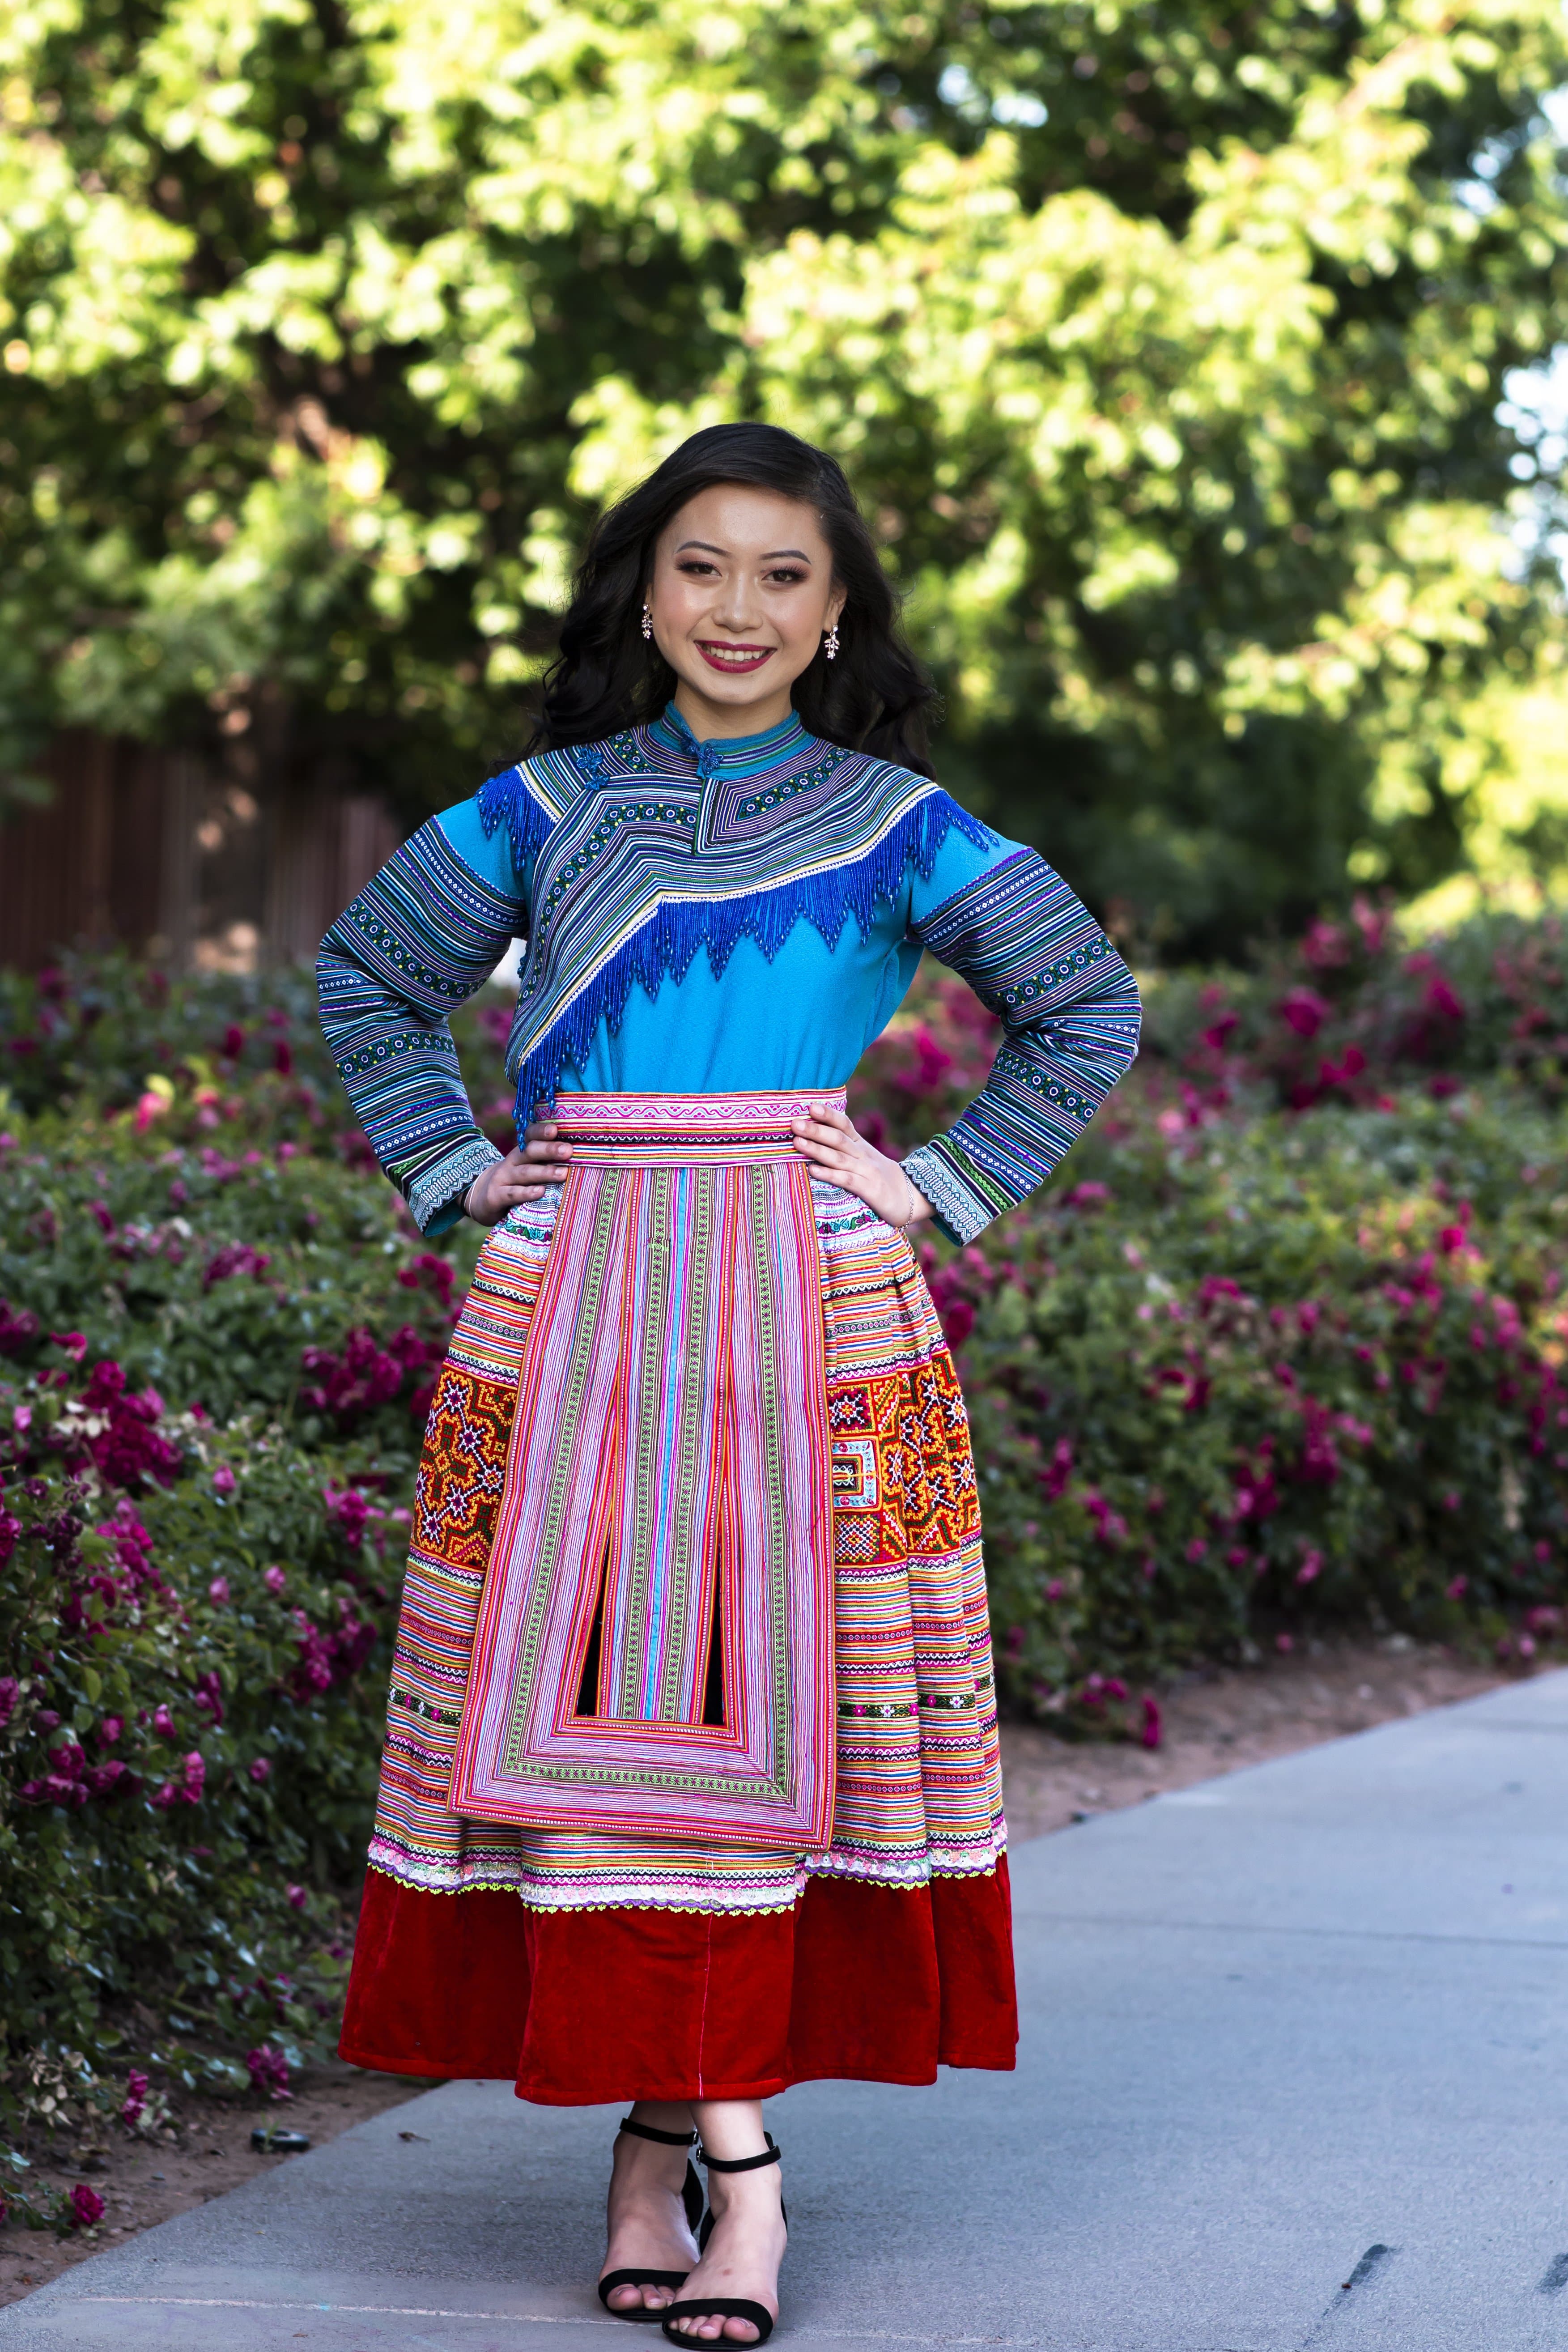 ON SALE!! Brand New Gorgeous Hmong Vietnamese Complete Outfit